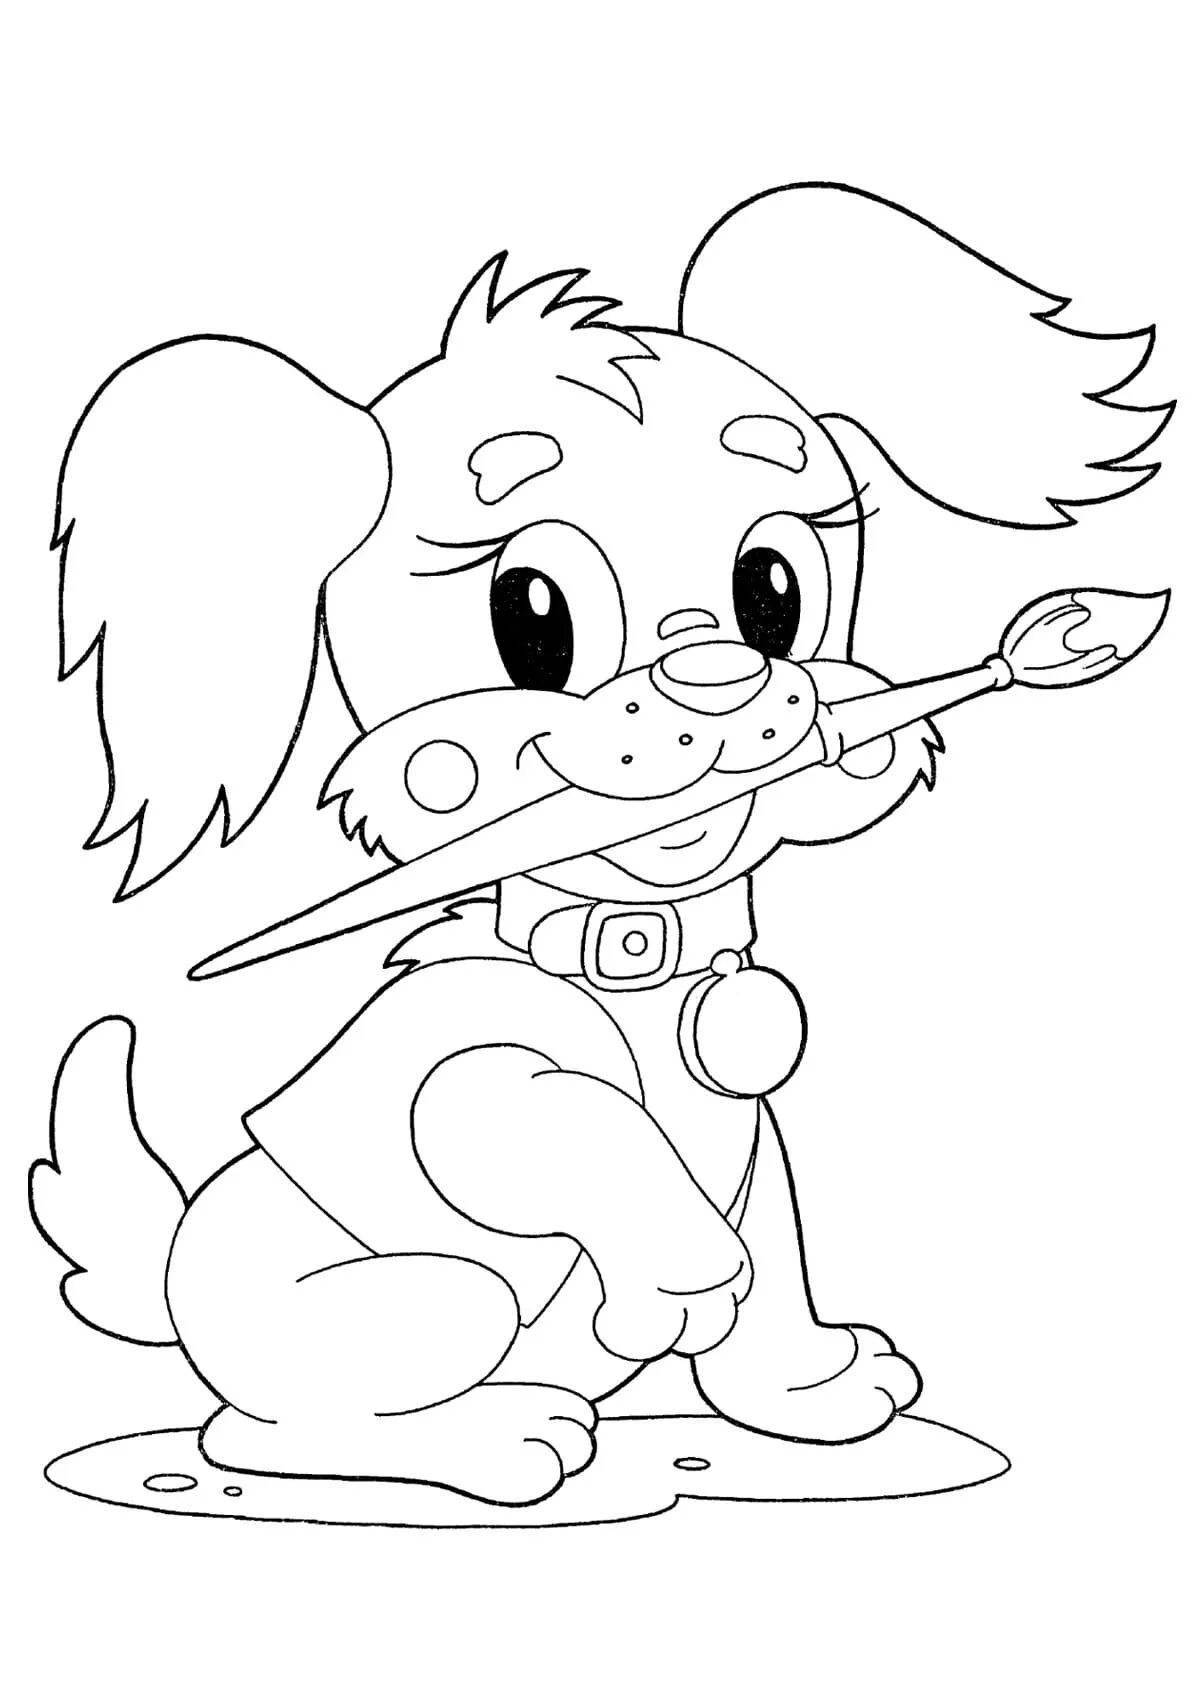 Colouring energetic puppy